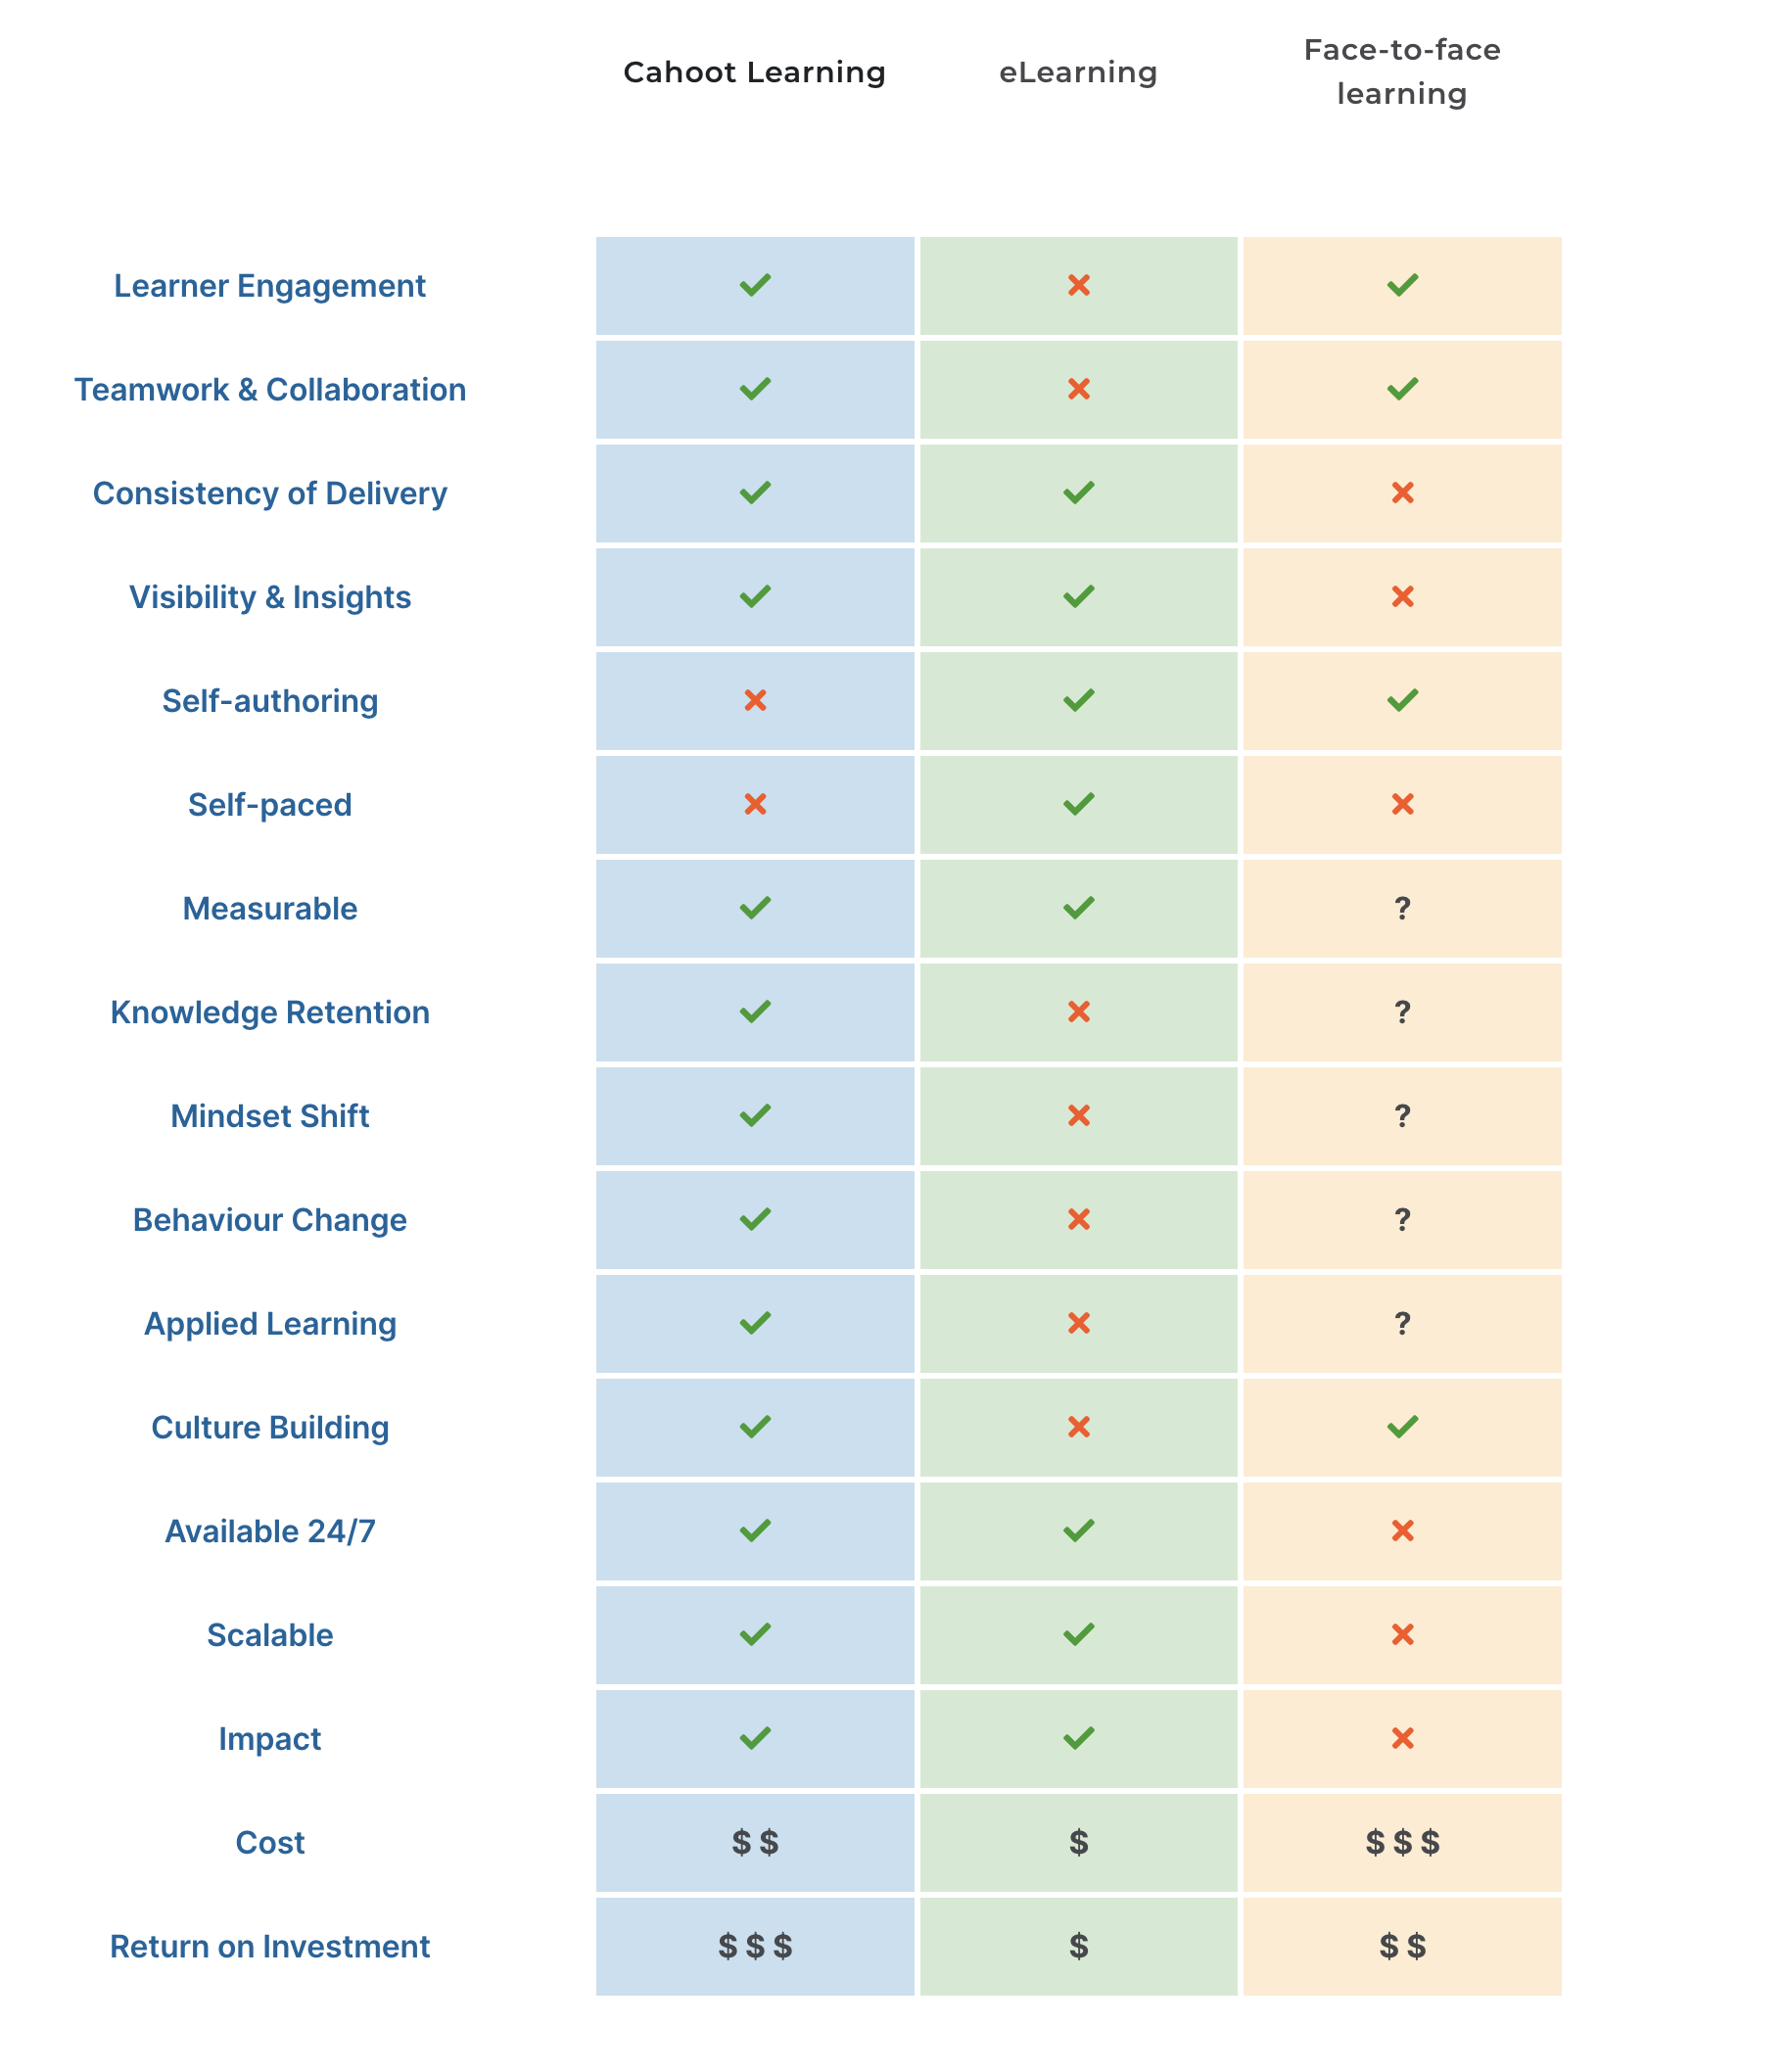 Comparison table between Cahoot Learning, eLearning and Face-to-face learning